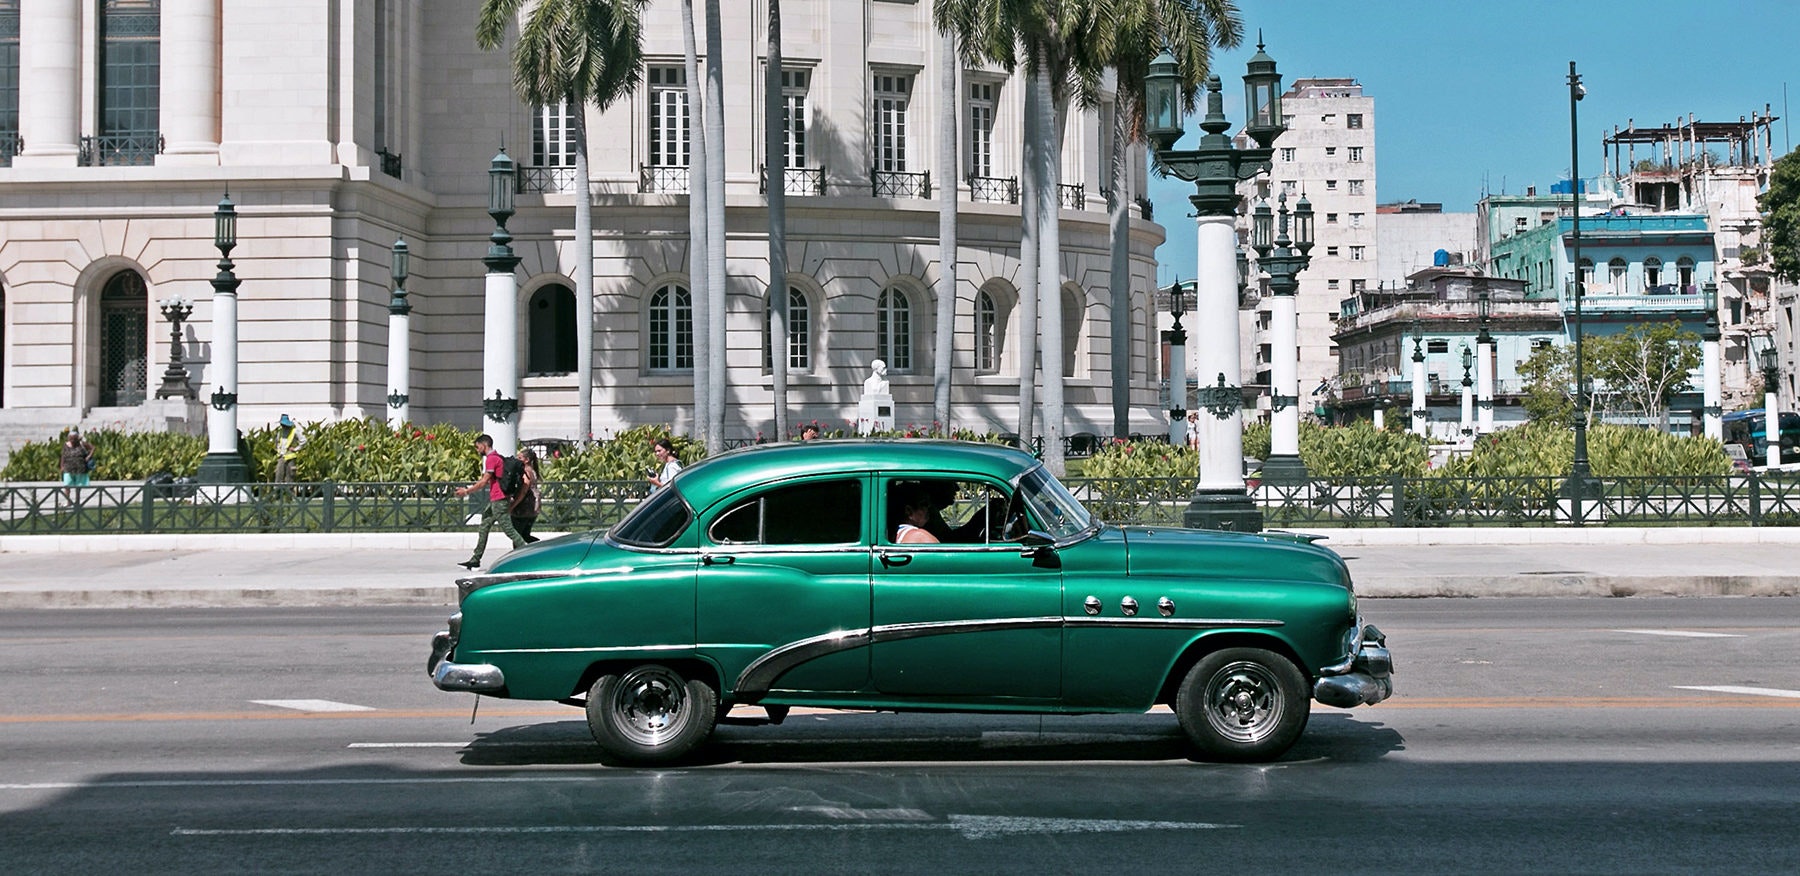 Which famous Cuban cocktail was invented in Havana?